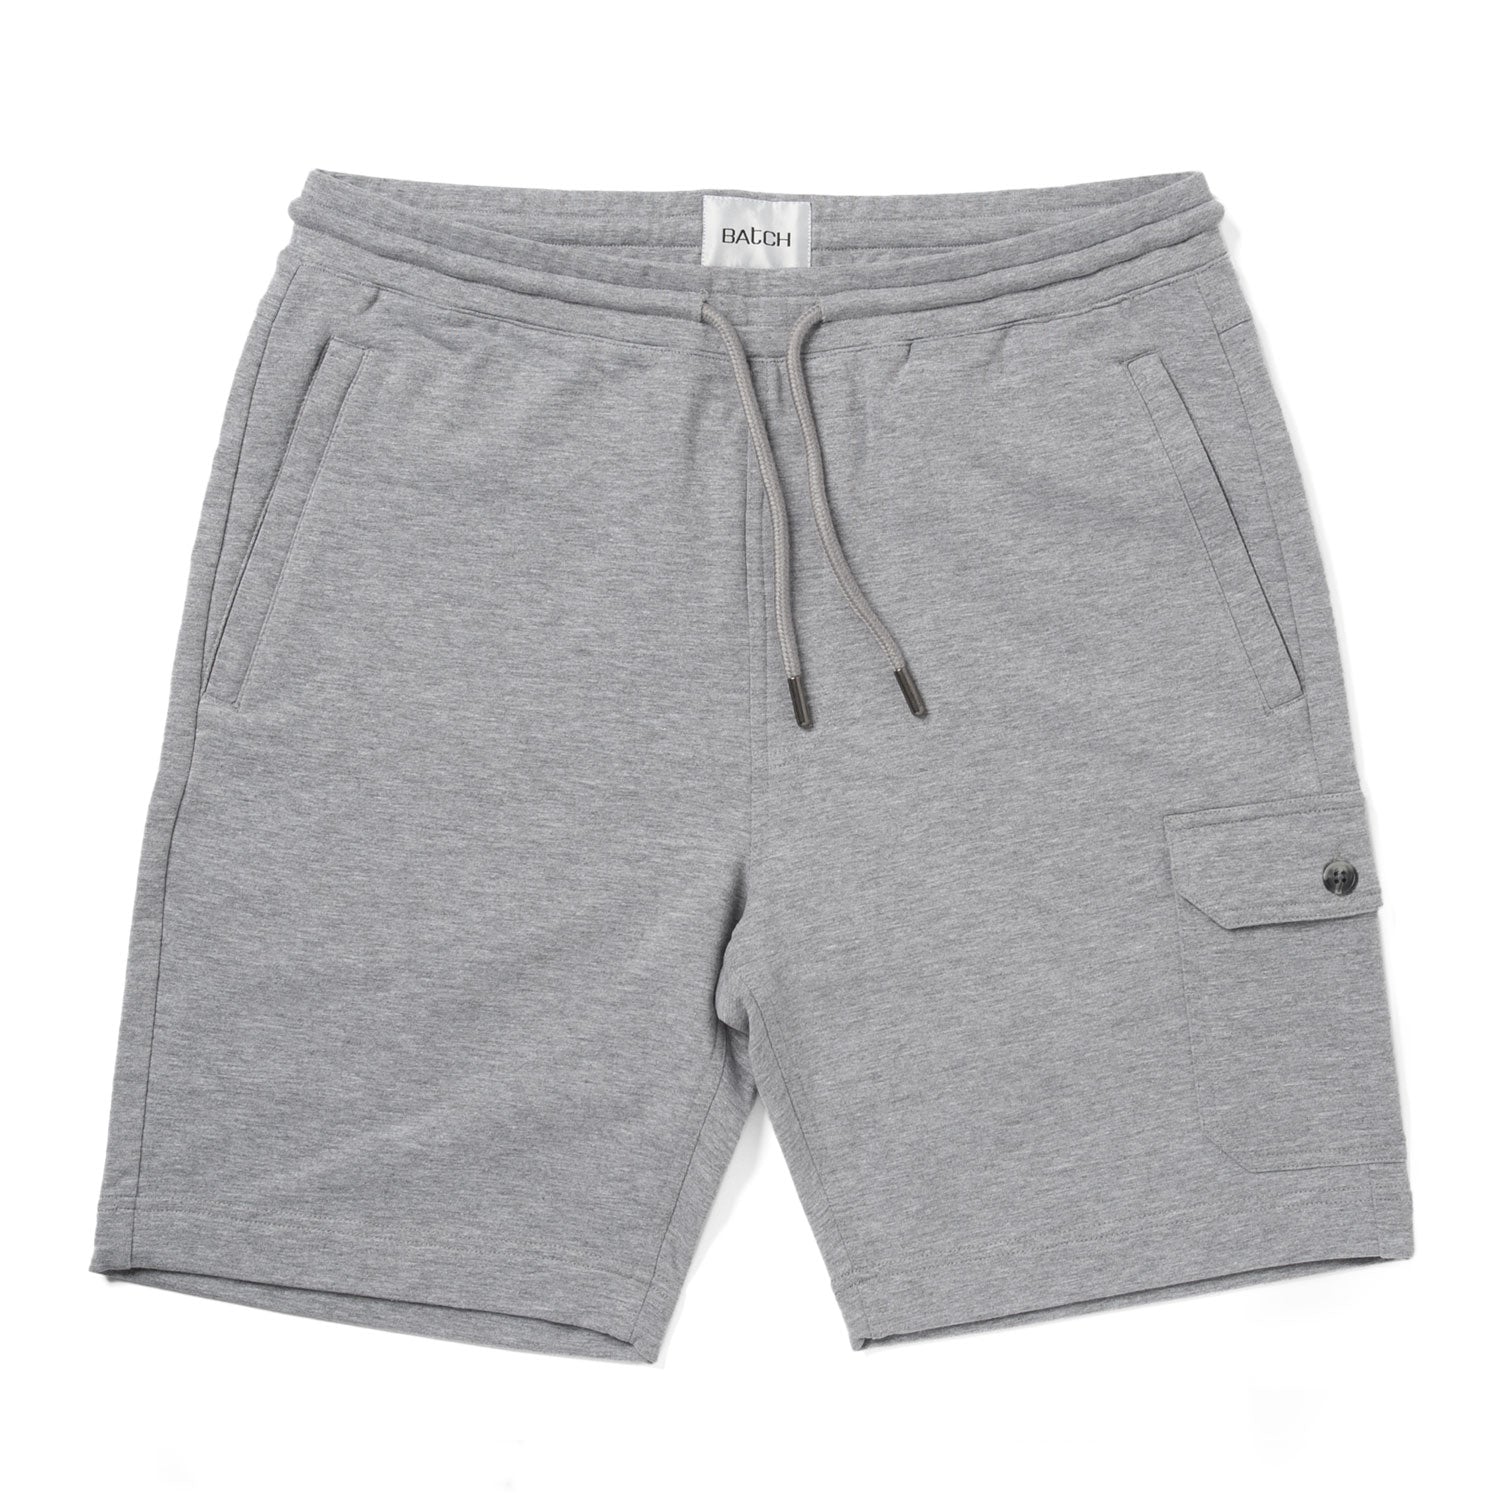 Constructor Short - Granite Gray French Terry